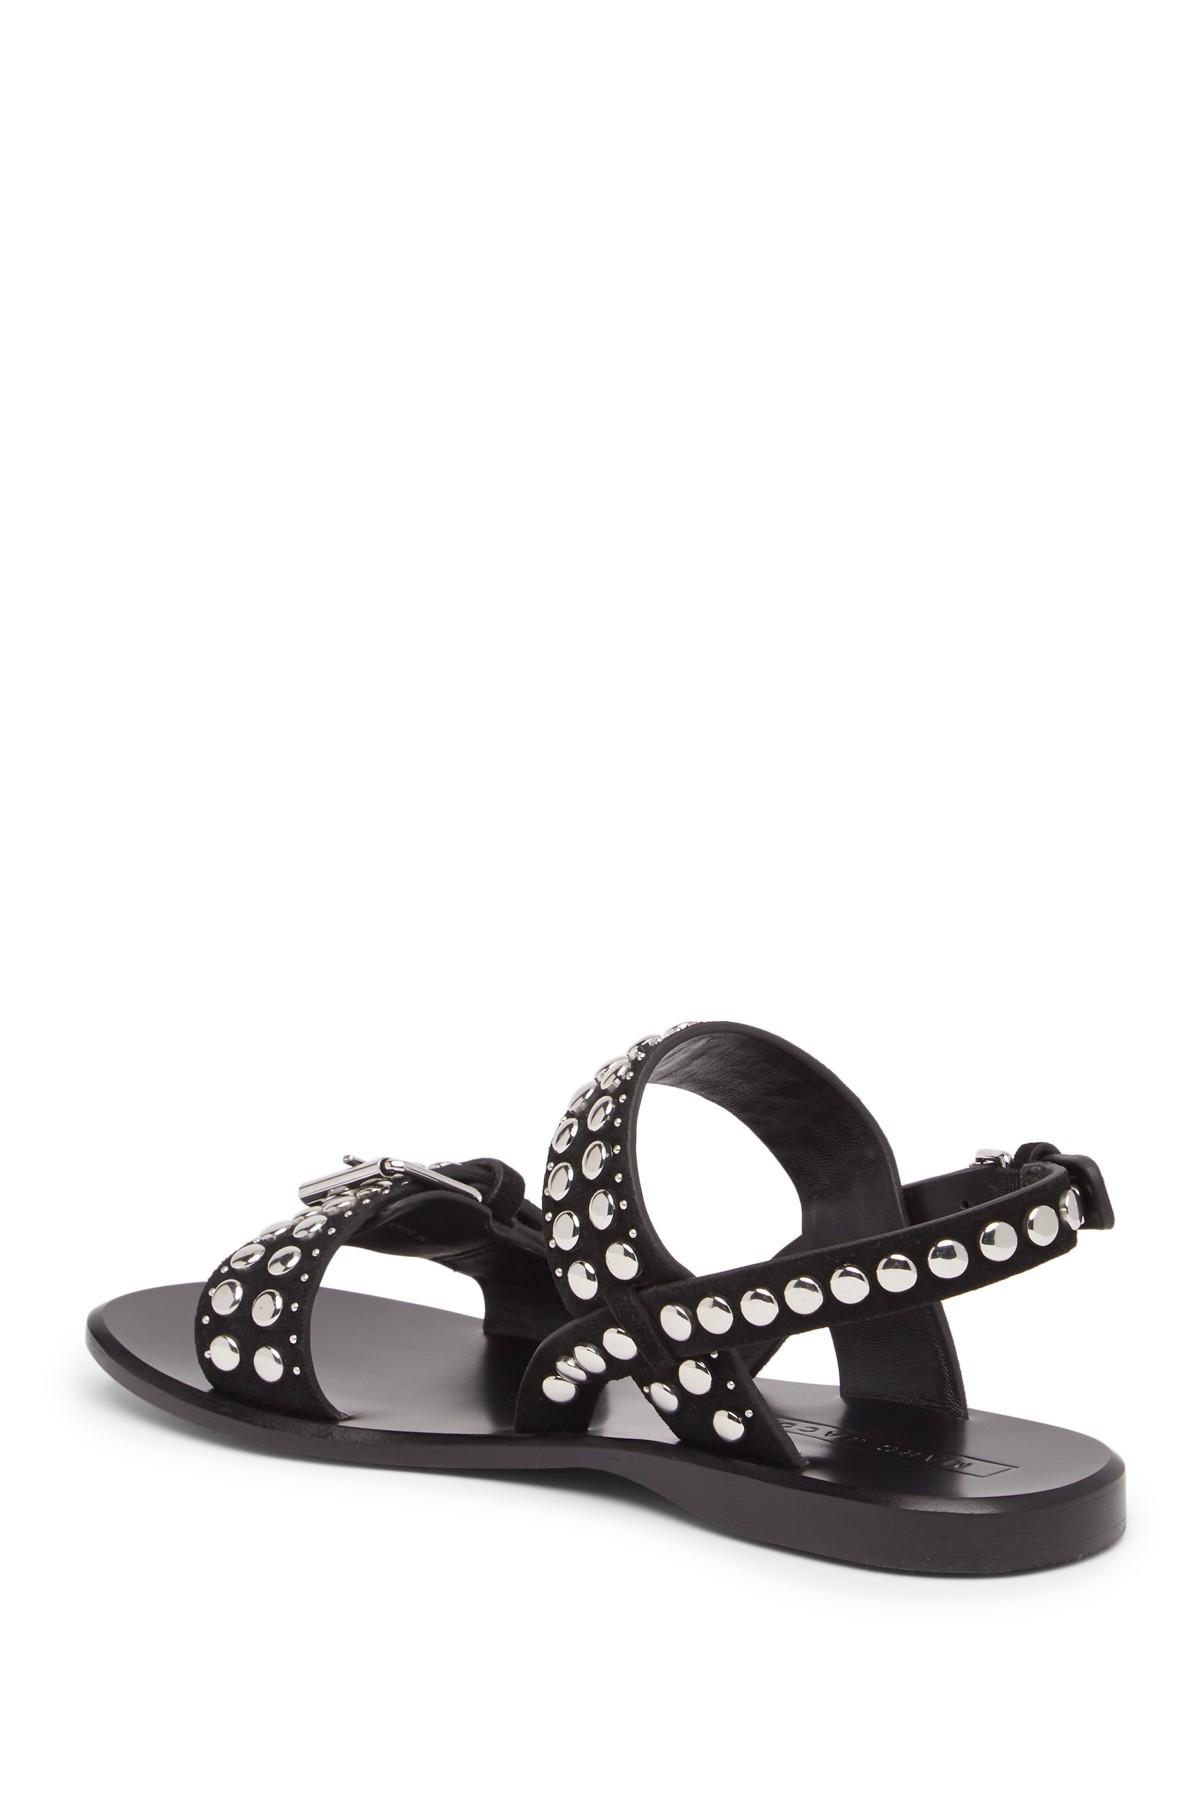 Marc Jacobs Tawny Flat Studded Leather Sandal in Black - Lyst